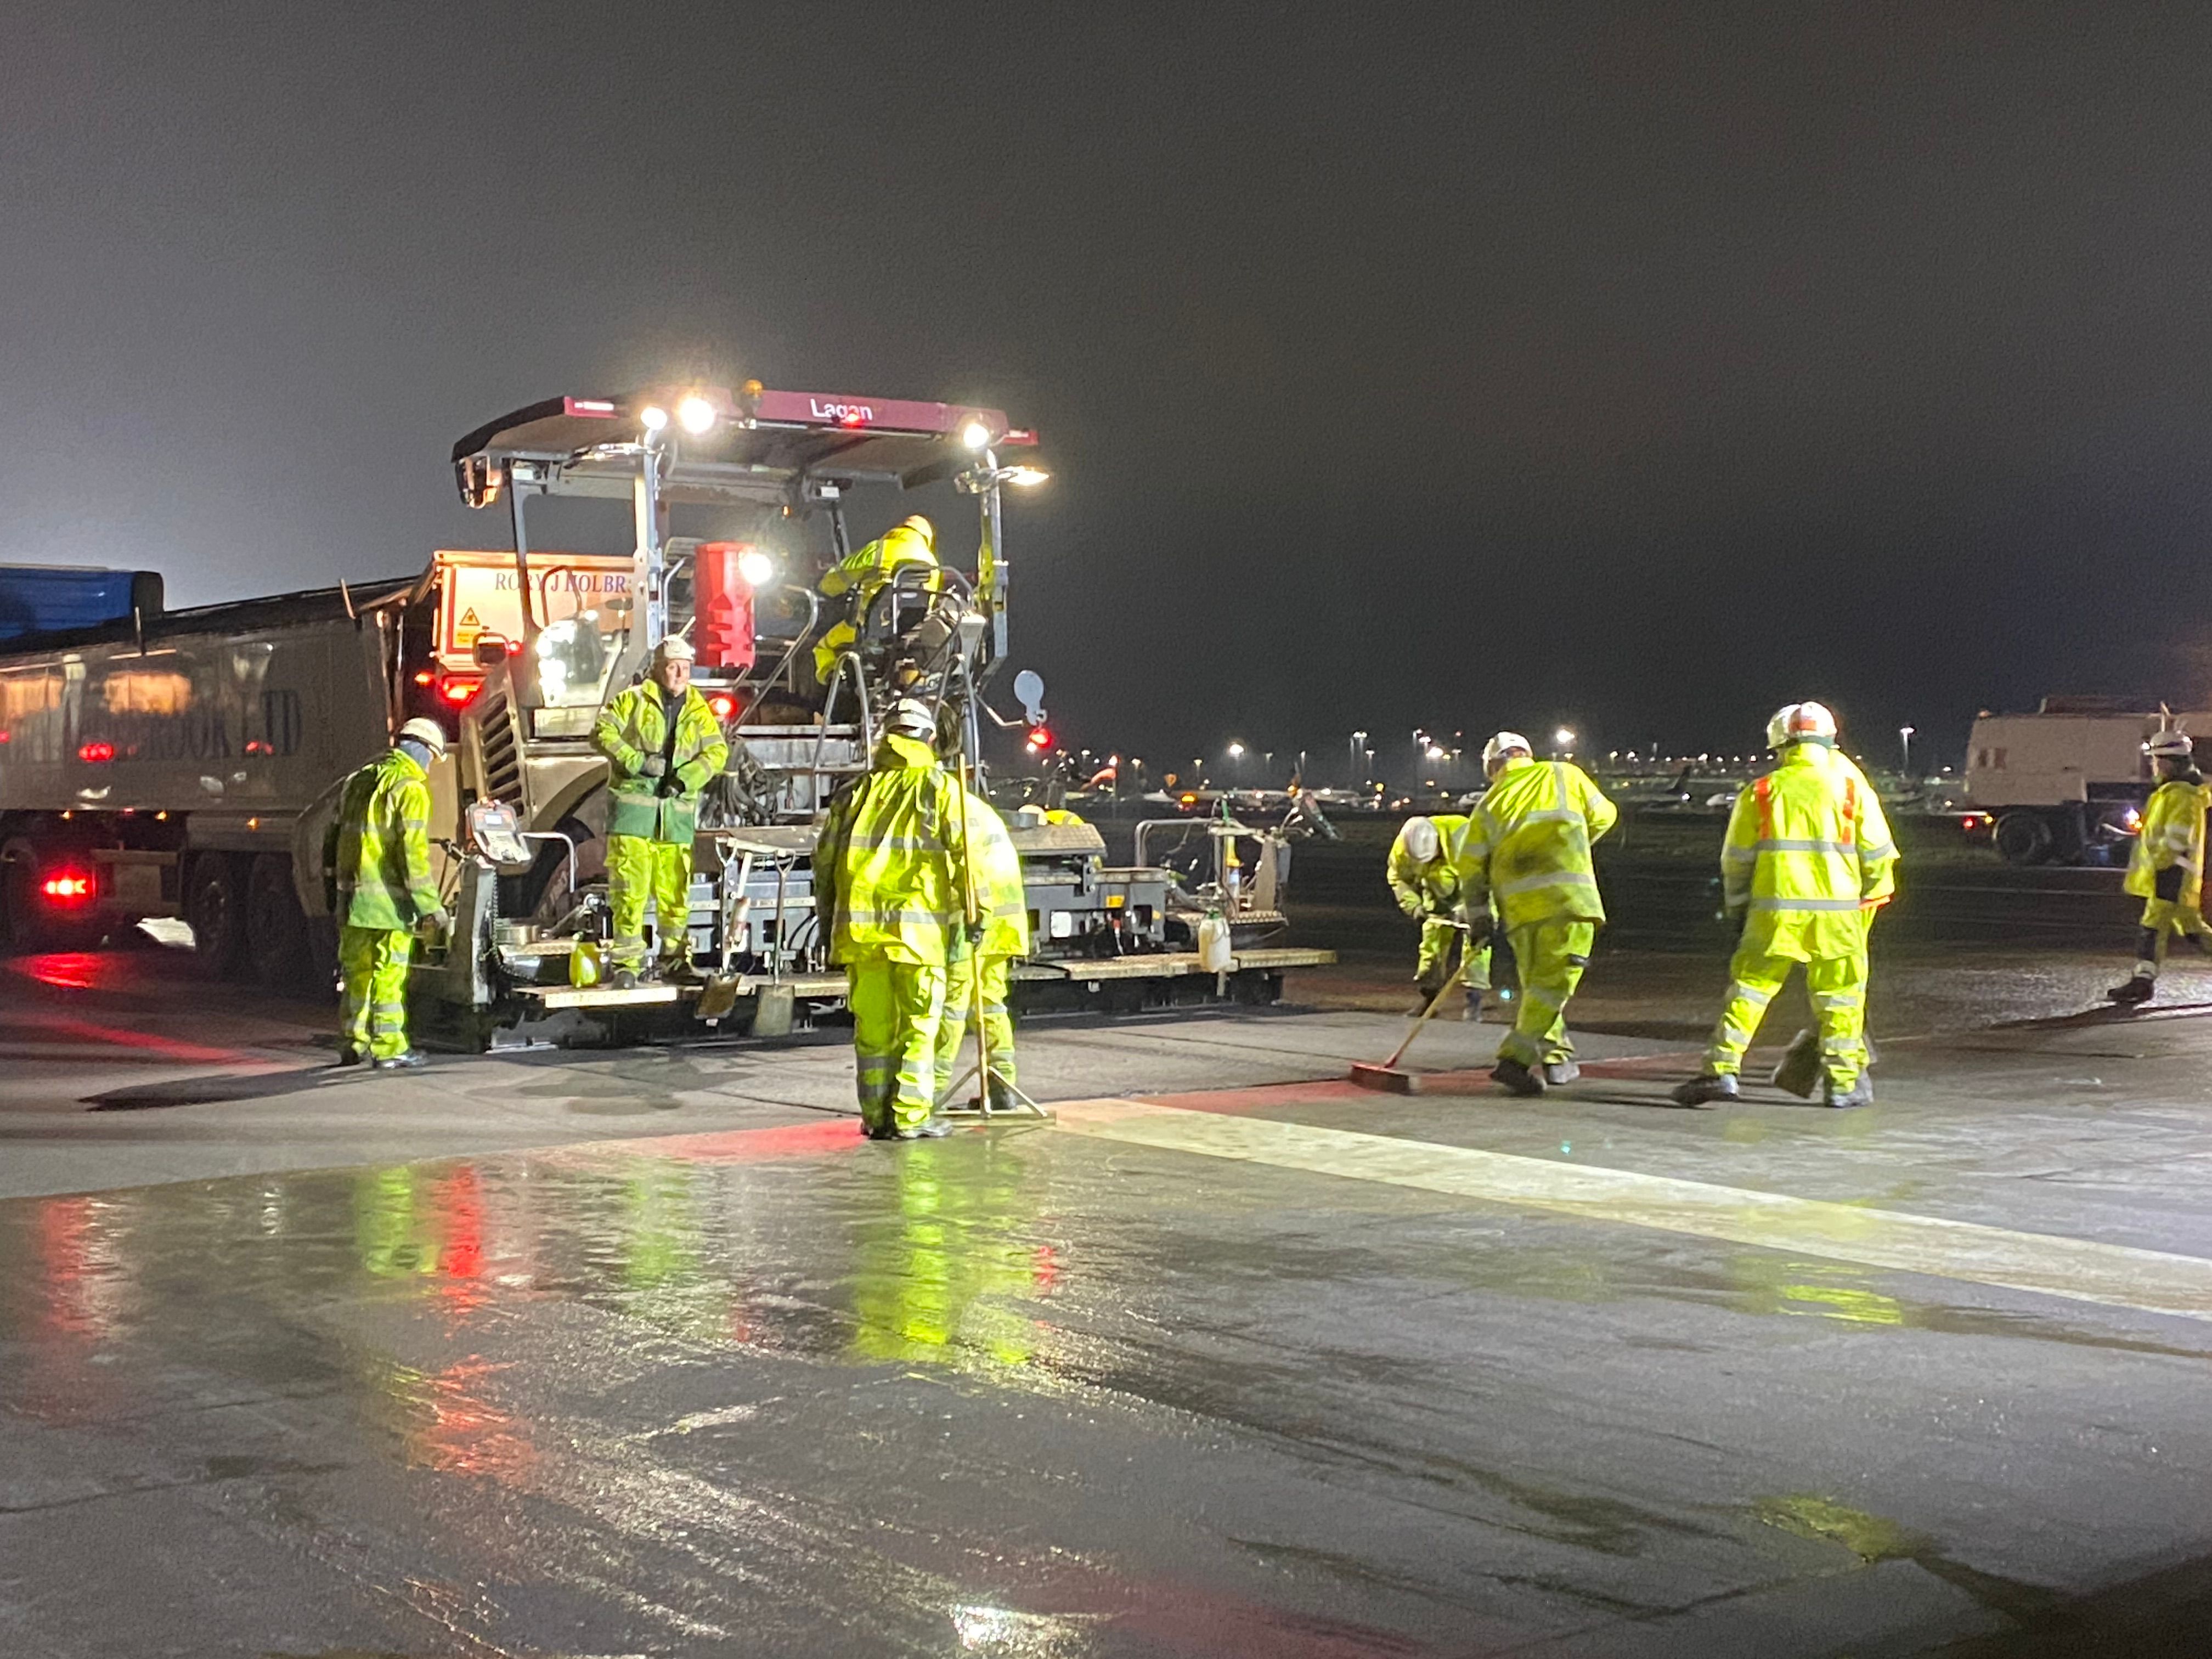 Resurfacing works at London Stansted Airport